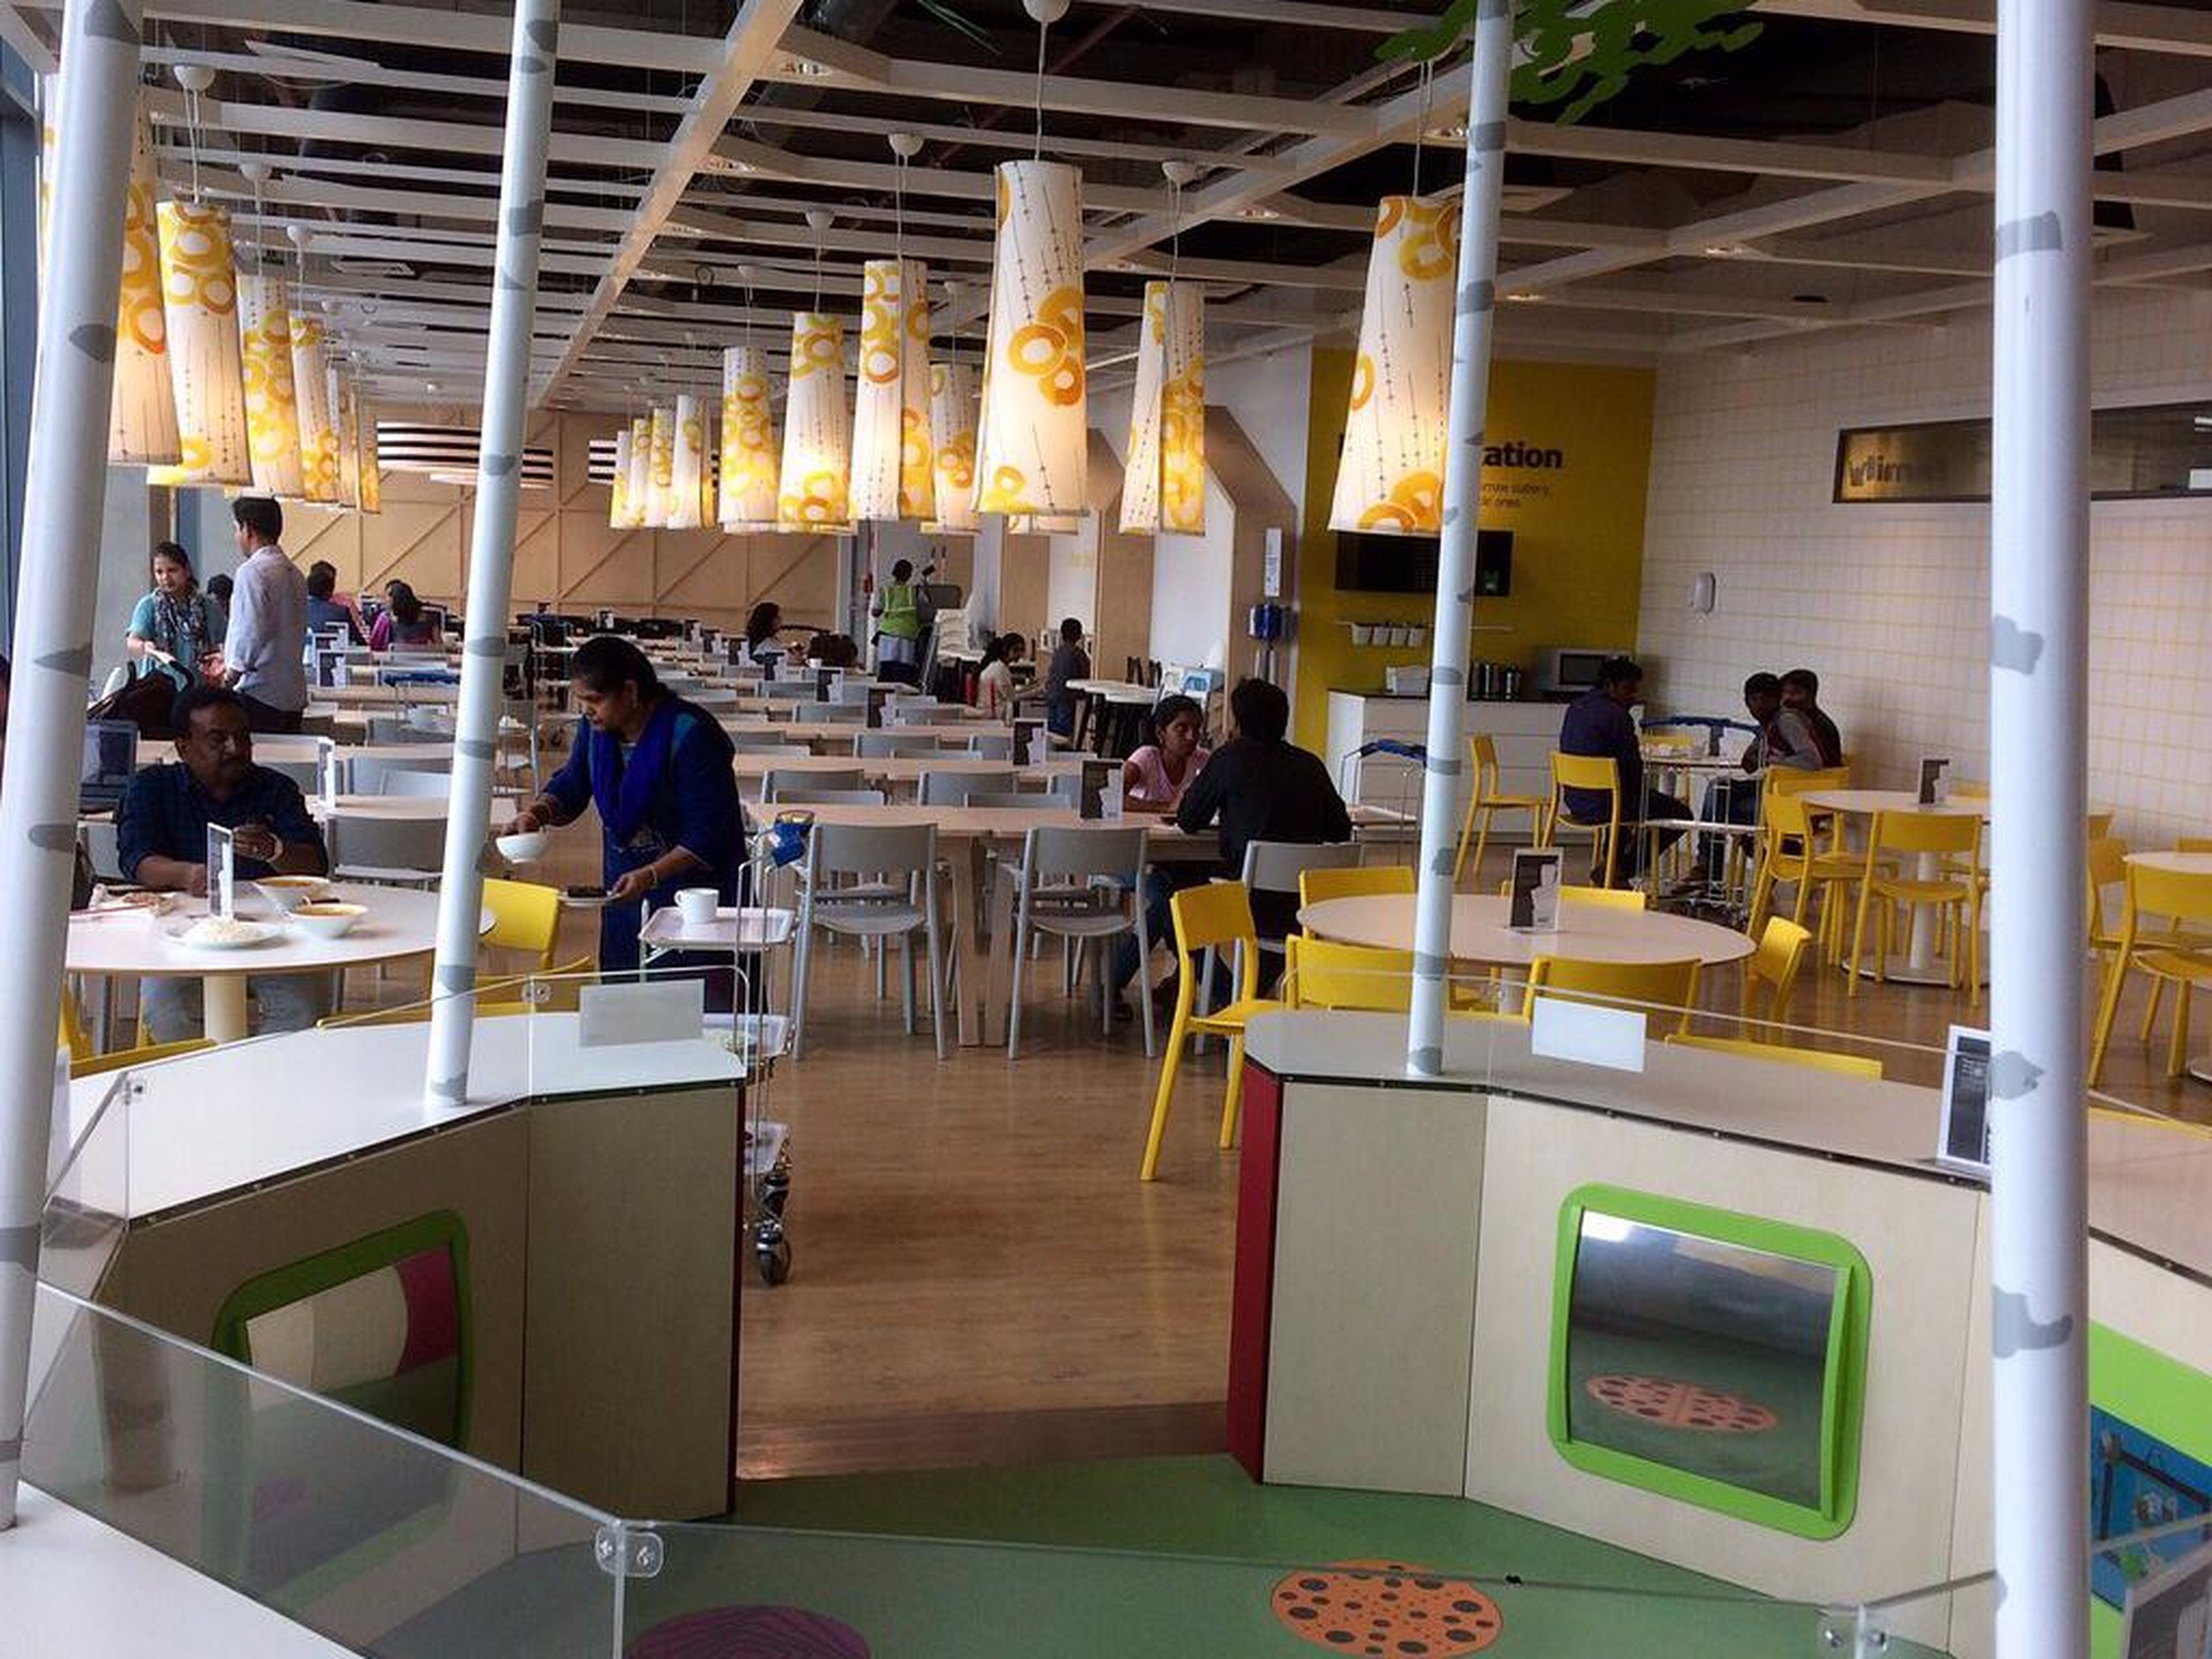 India's first IKEA opened in 2018 in Hyderabad.